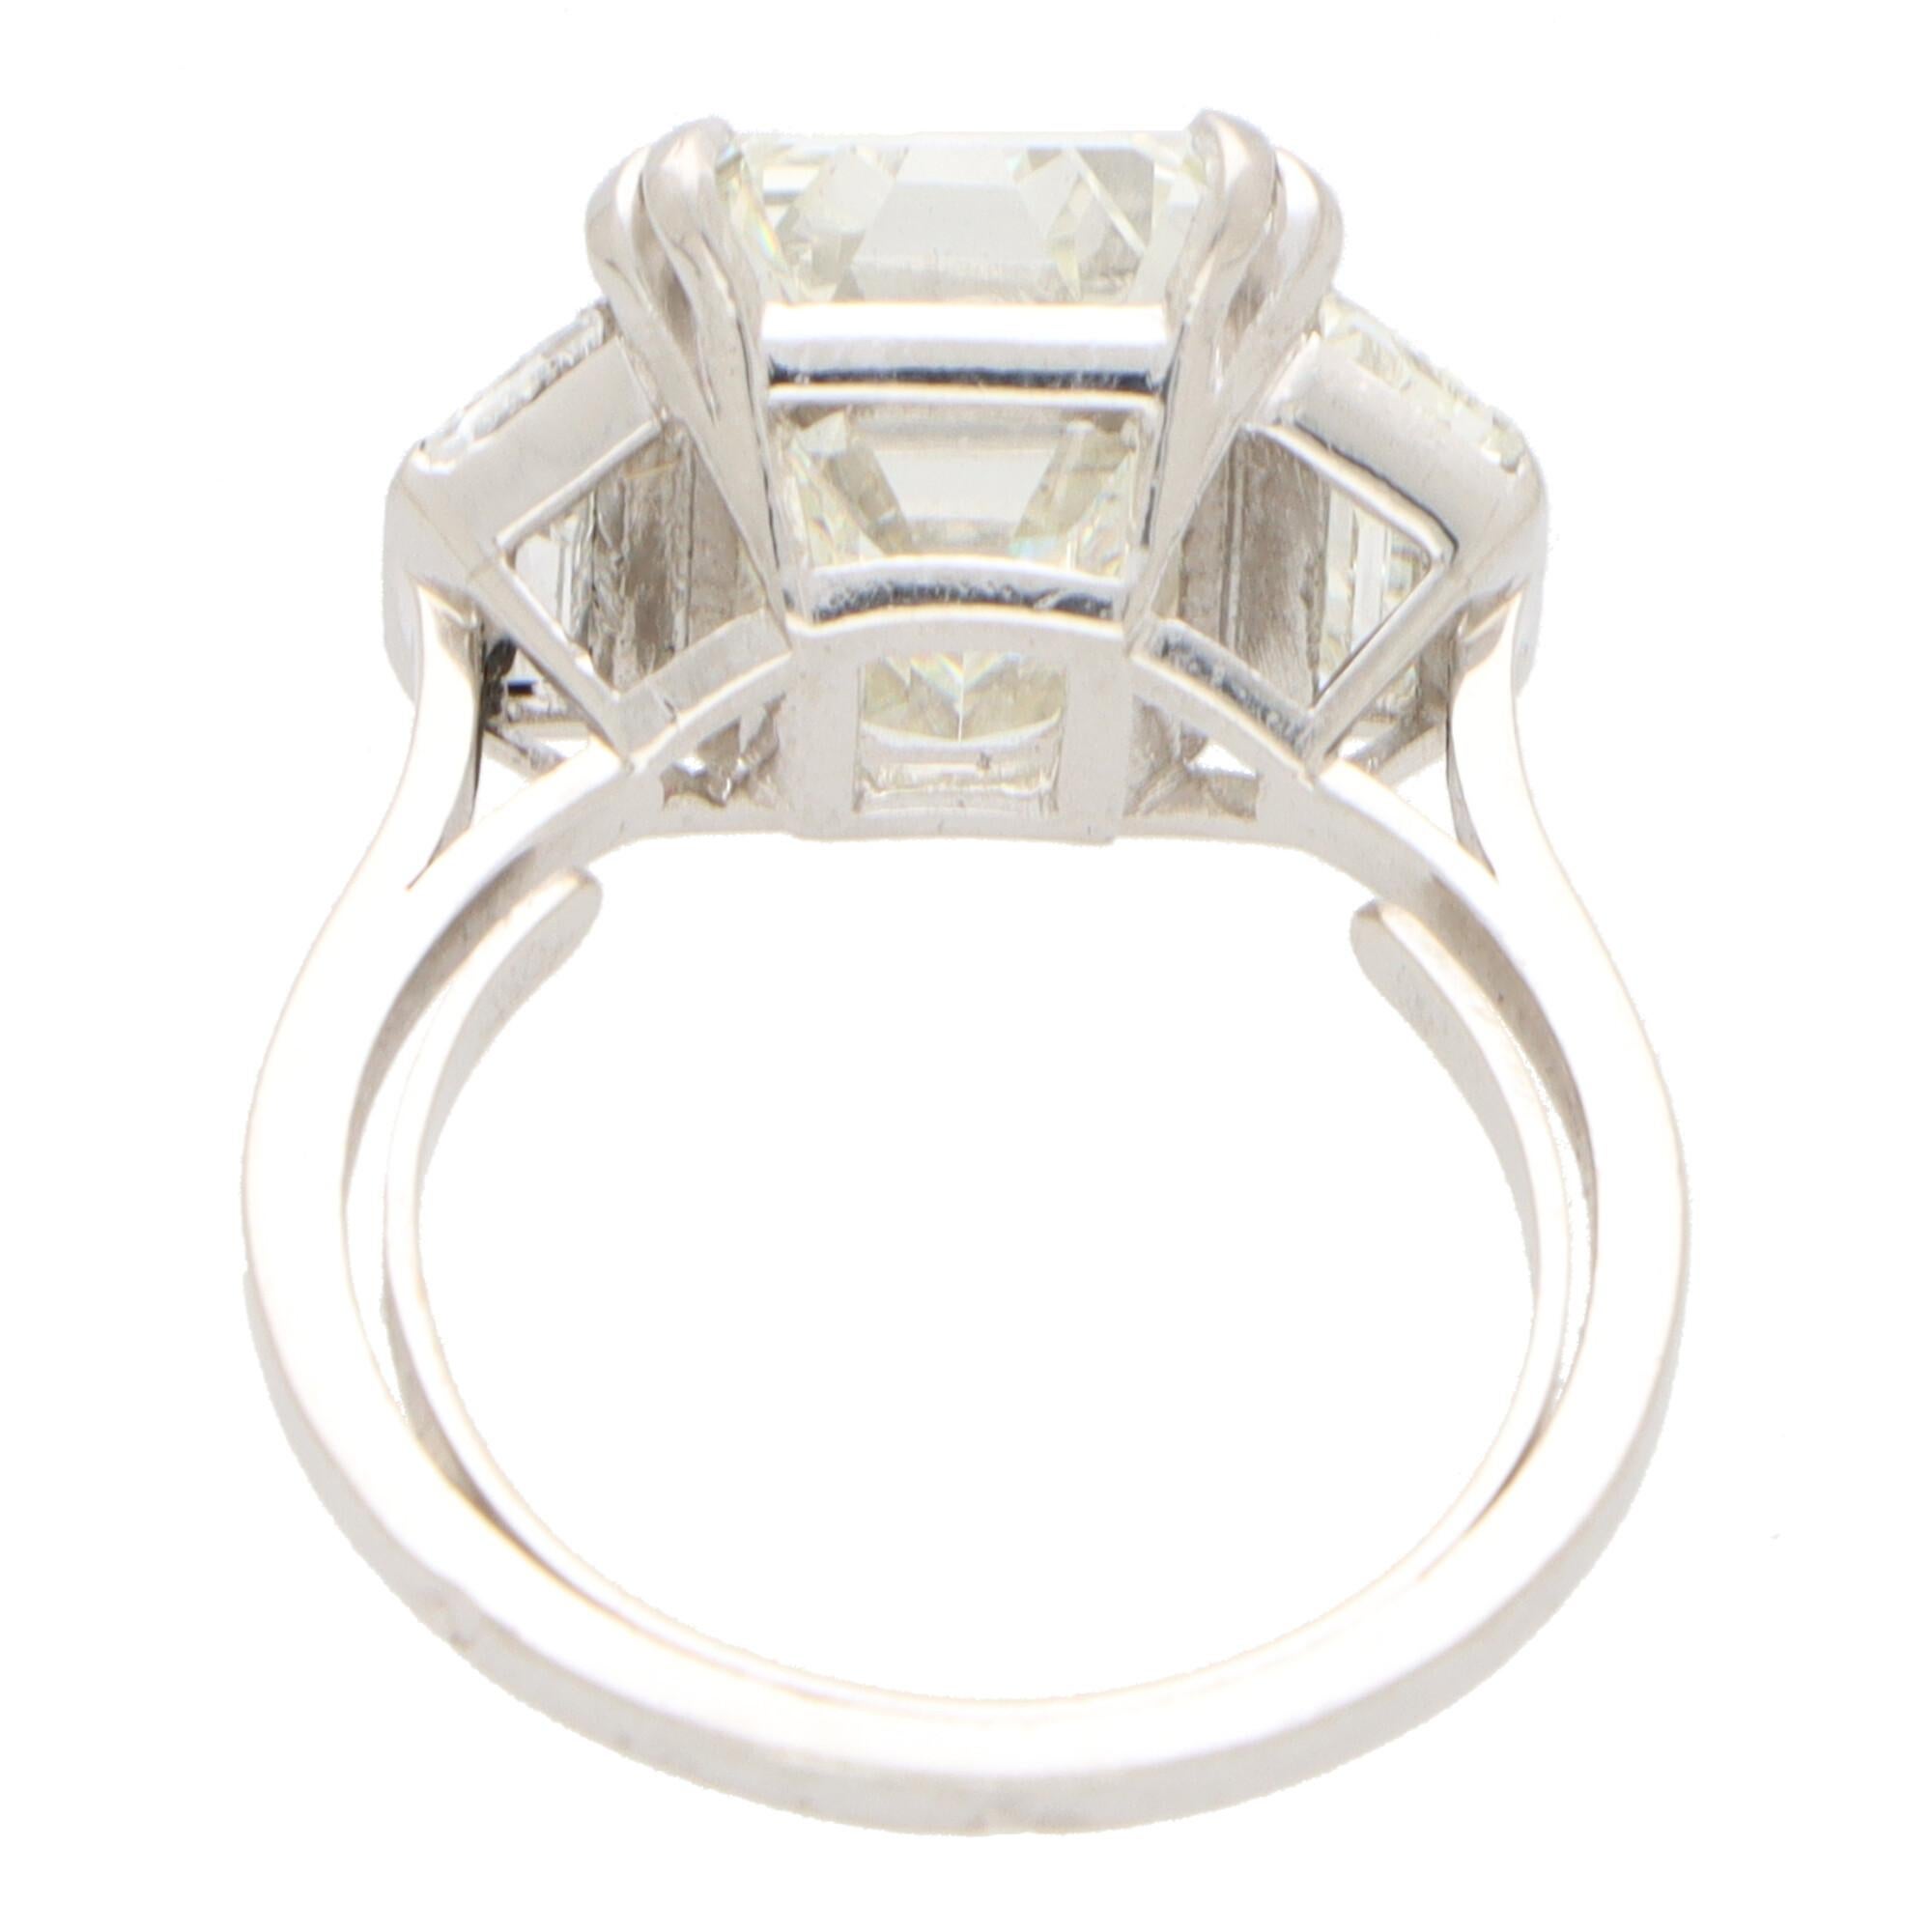 Art Deco Style GIA Certified Emerald Cut Diamond Ring Set in Platinum For Sale 3